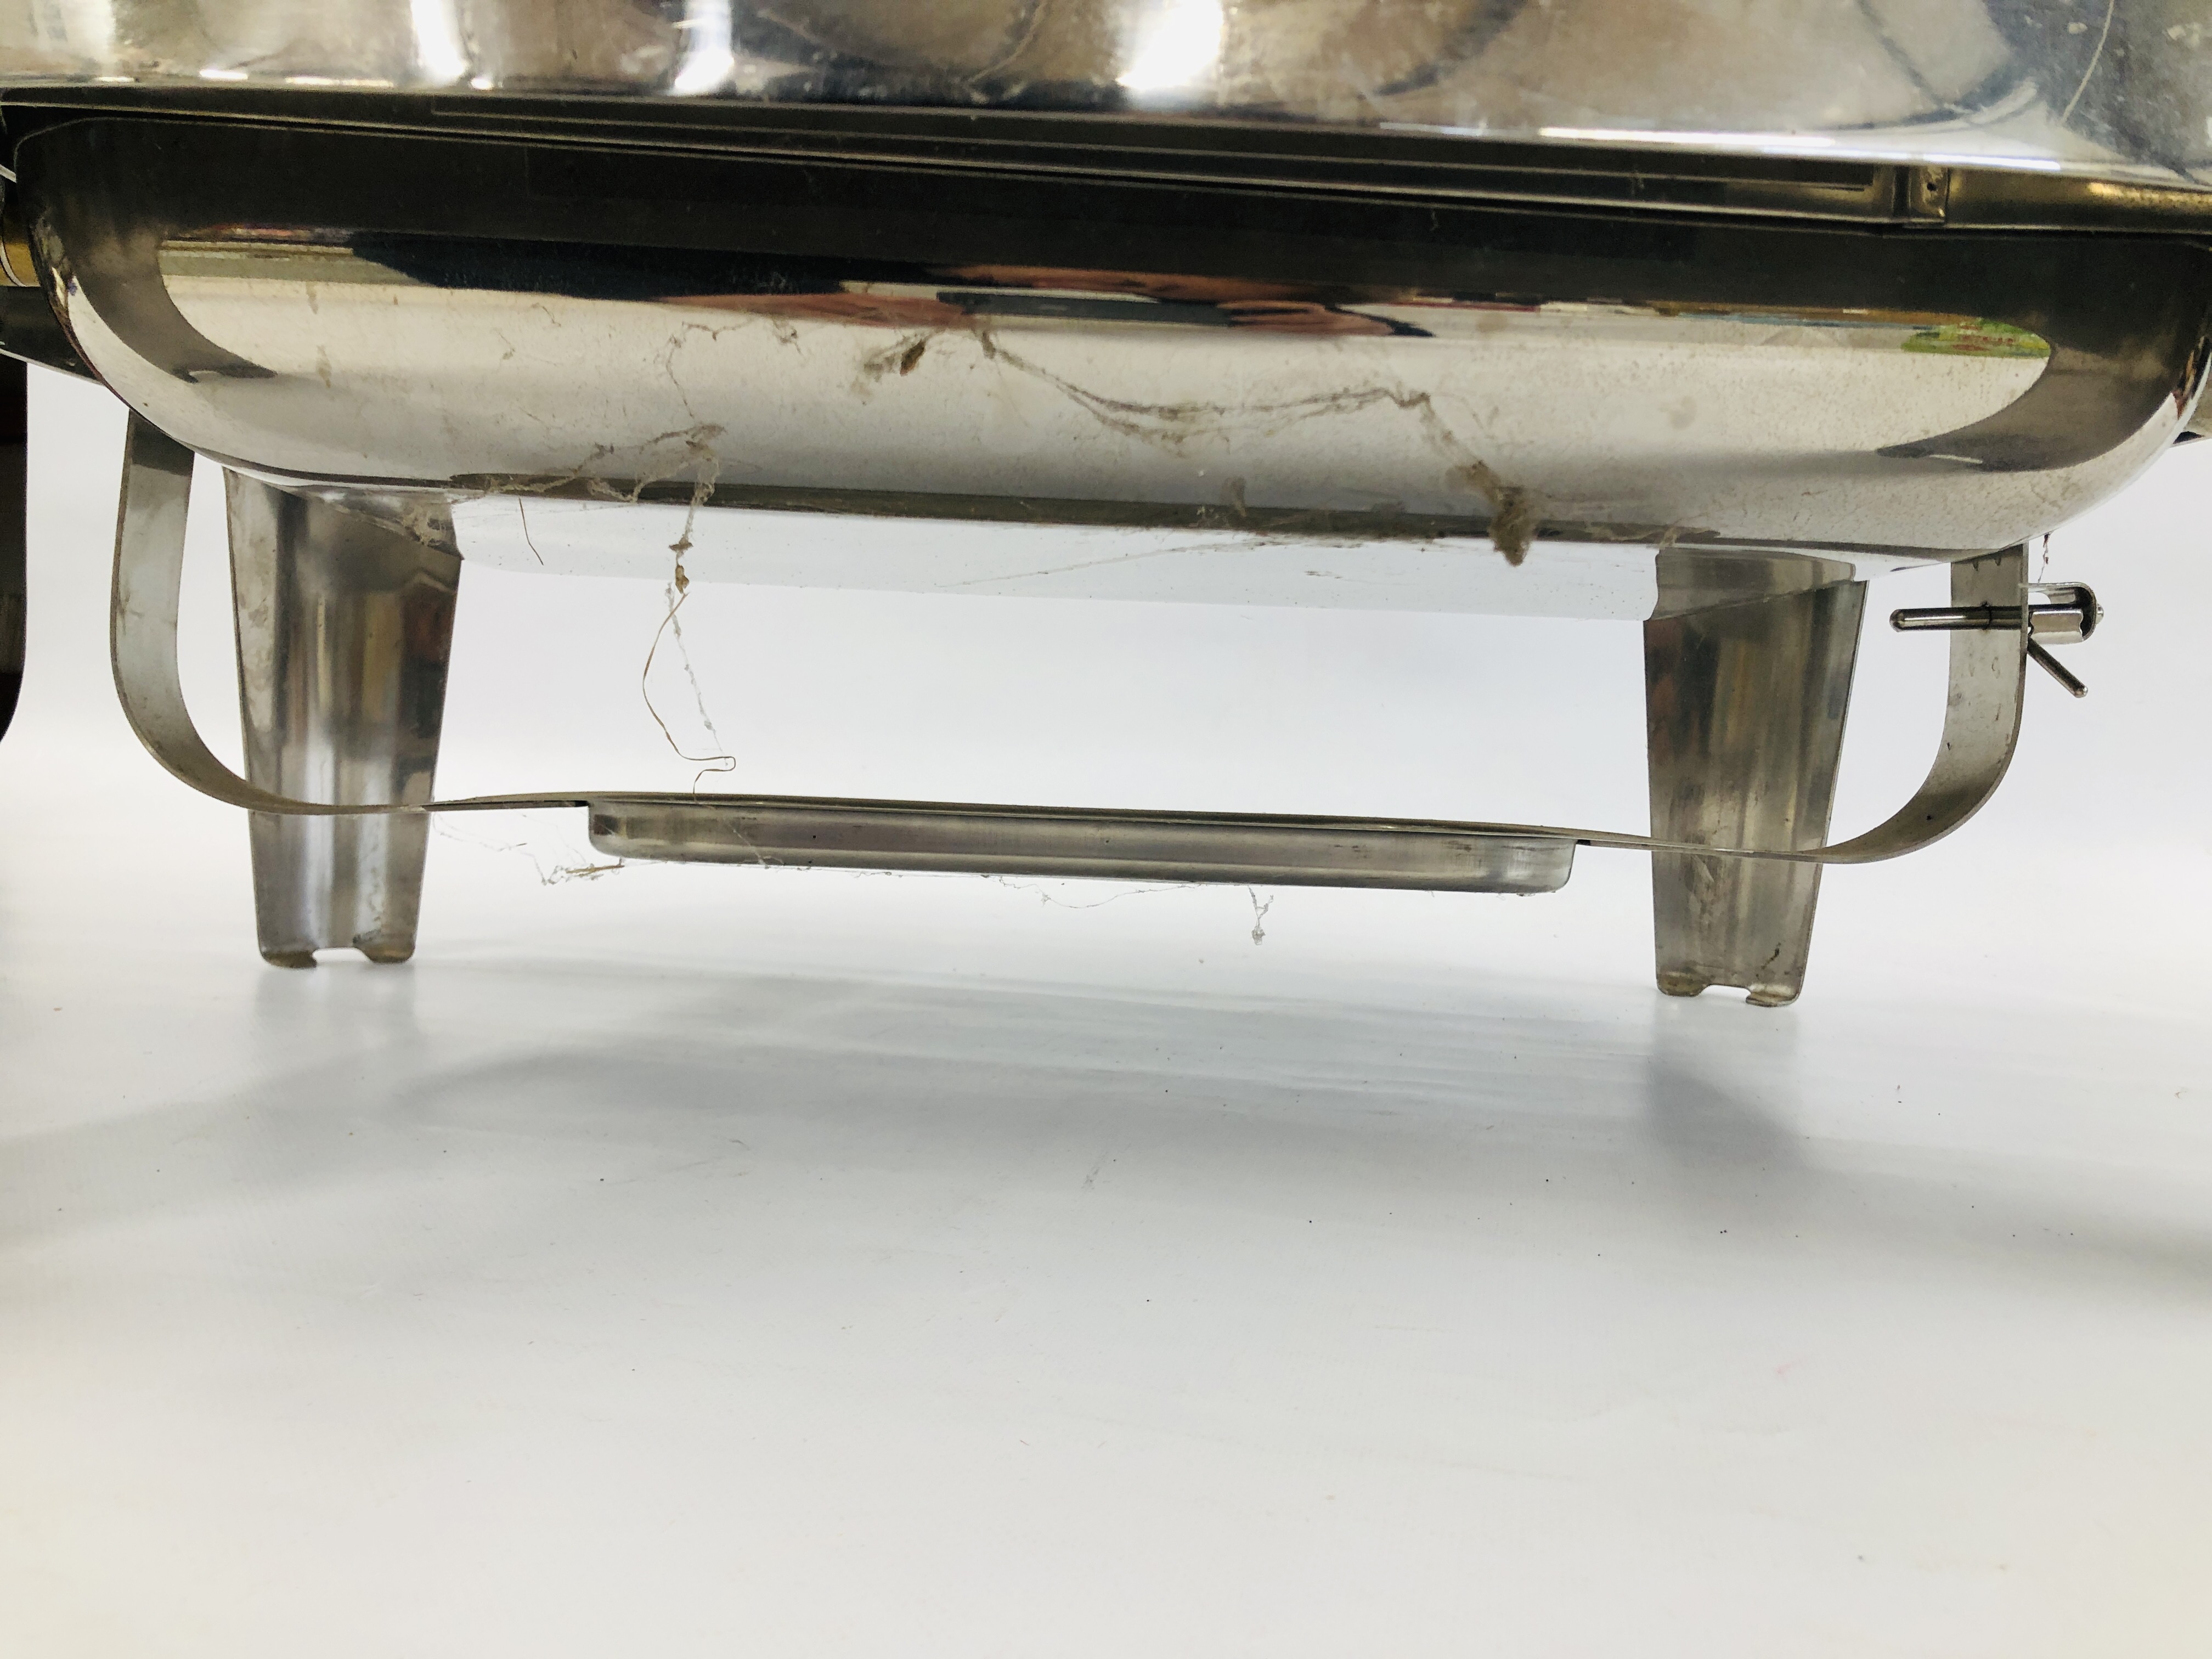 A STAINLESS STEEL CHAFING DISH WITH BURNERS. - Image 4 of 4